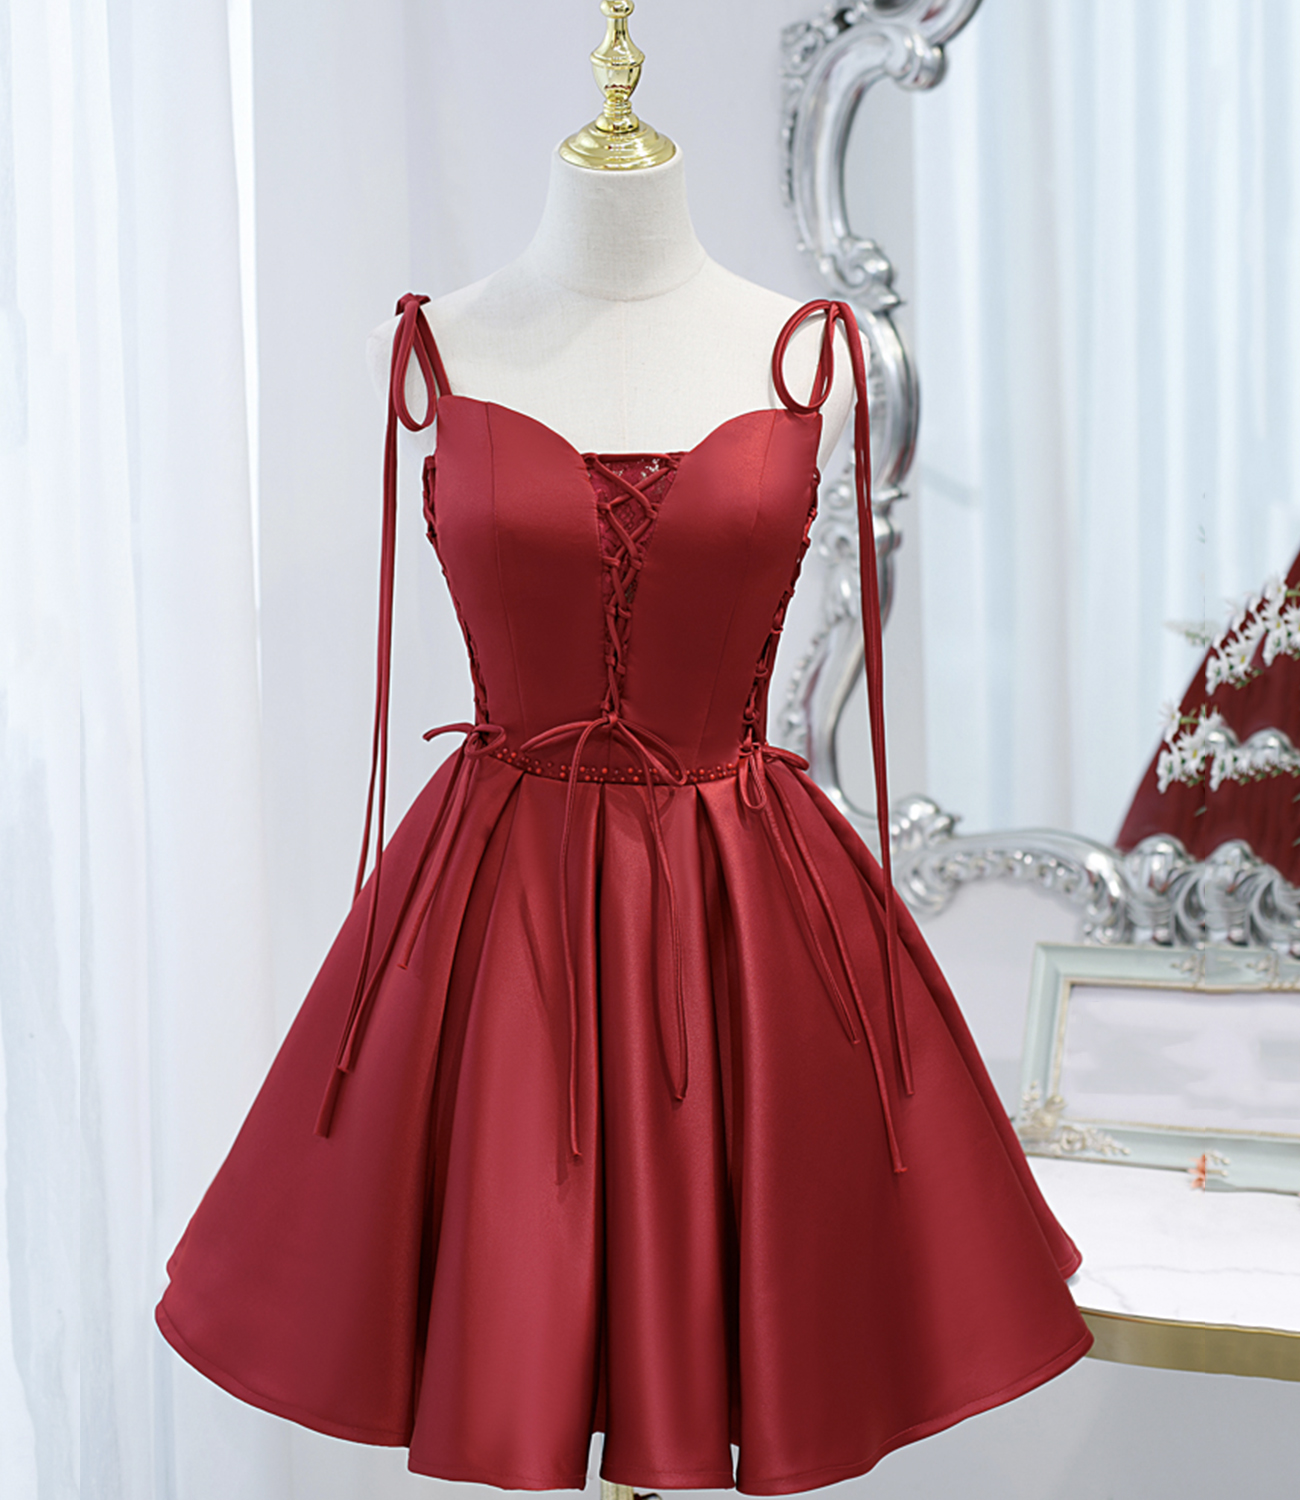 Burgundy Satin Lace-up Short Prom Dress Party Dress on Luulla